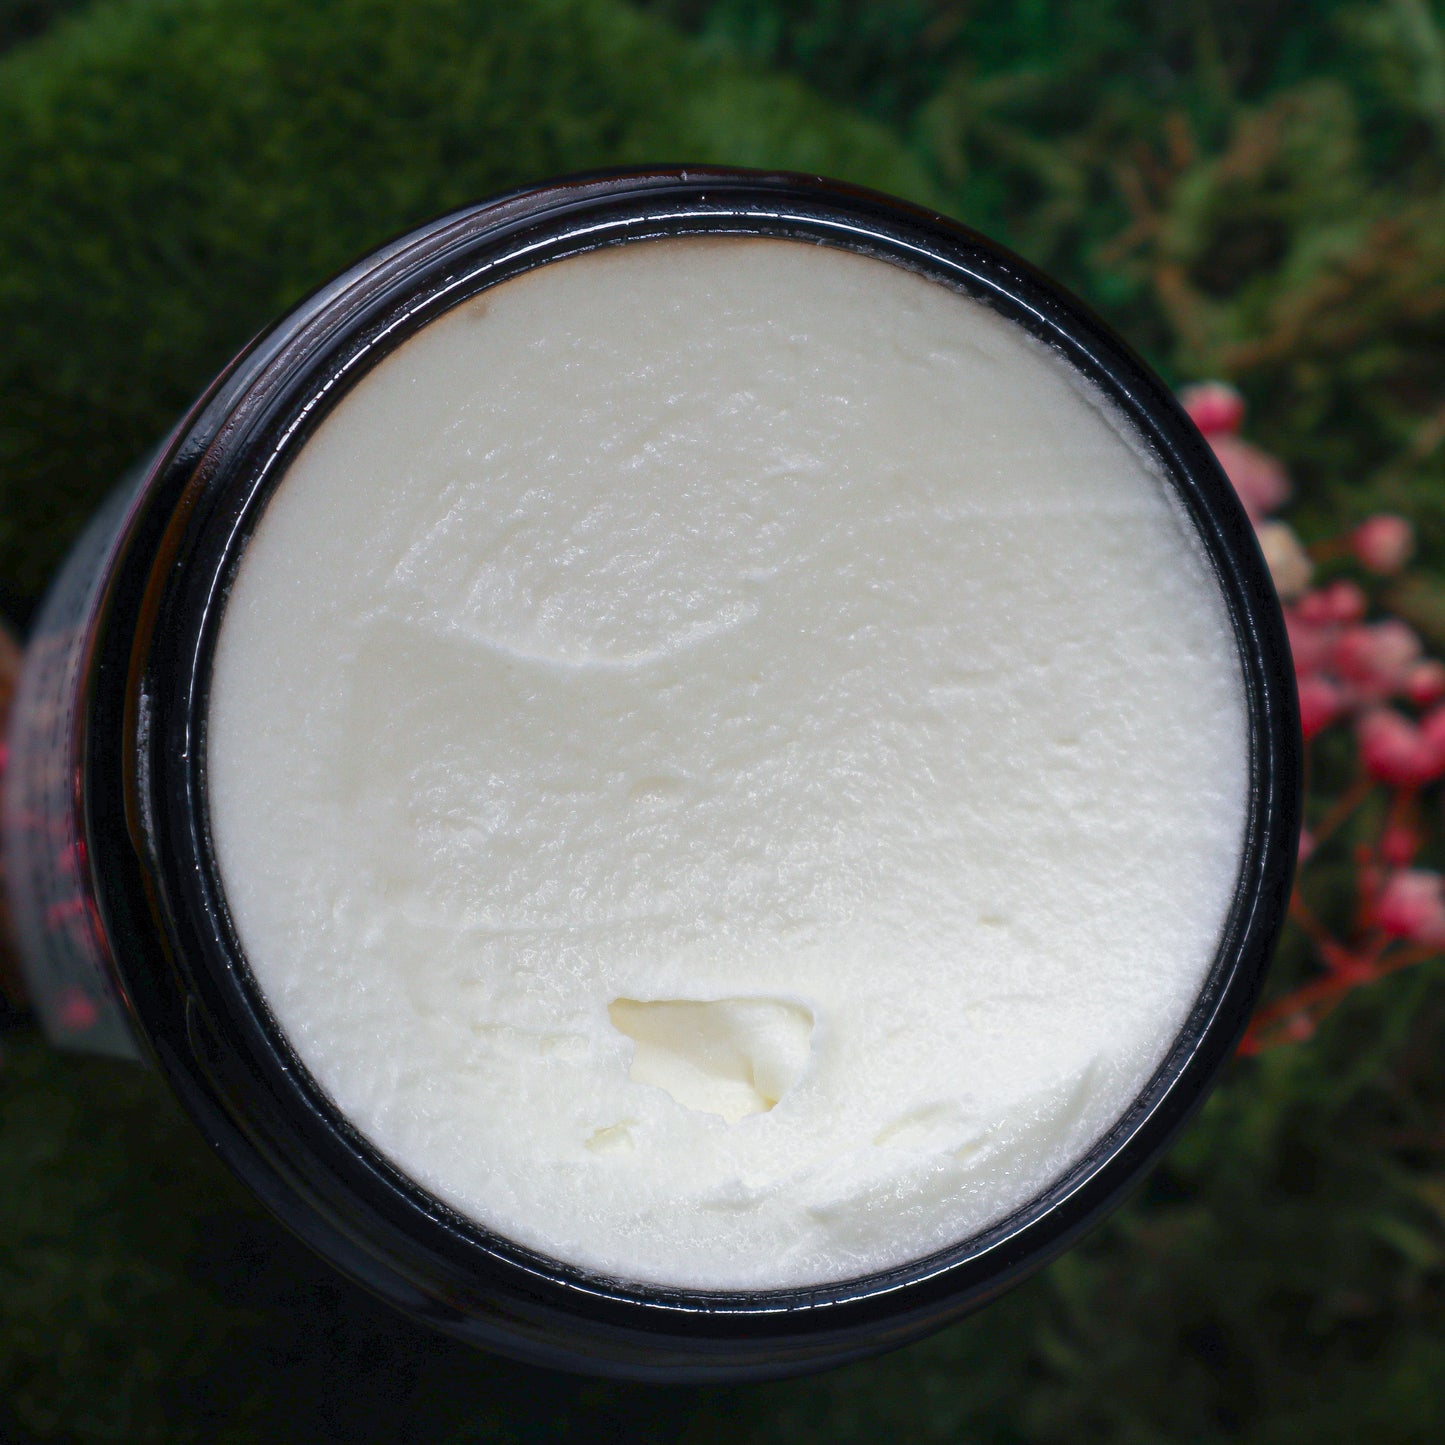 *UPDATED FORMULA* Gypsy Summer Whipped Body Butter